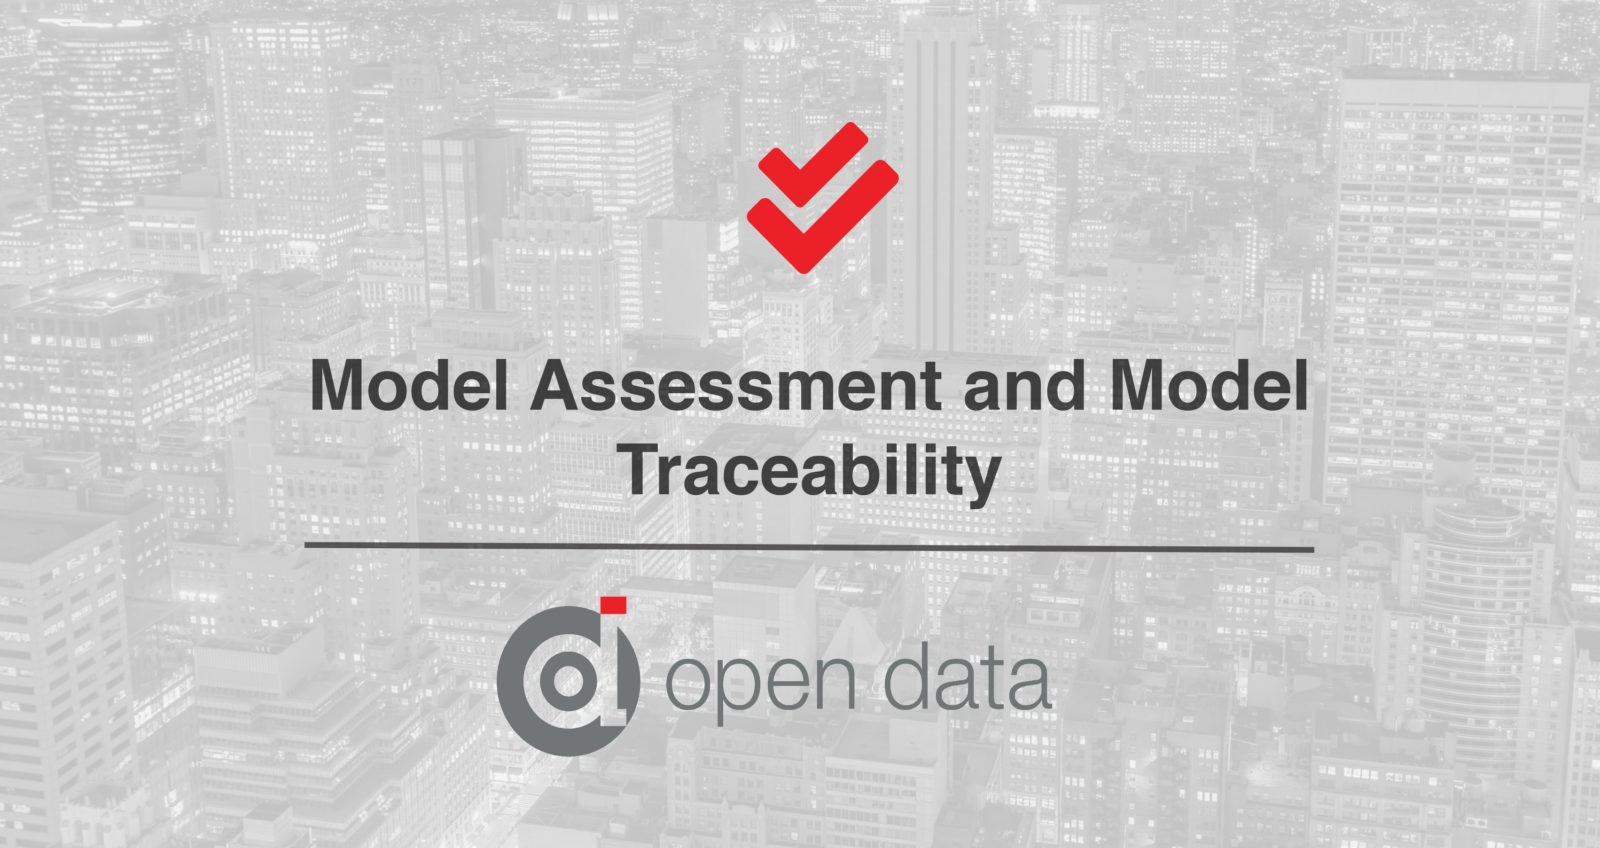 Model Assessment and traceability blog